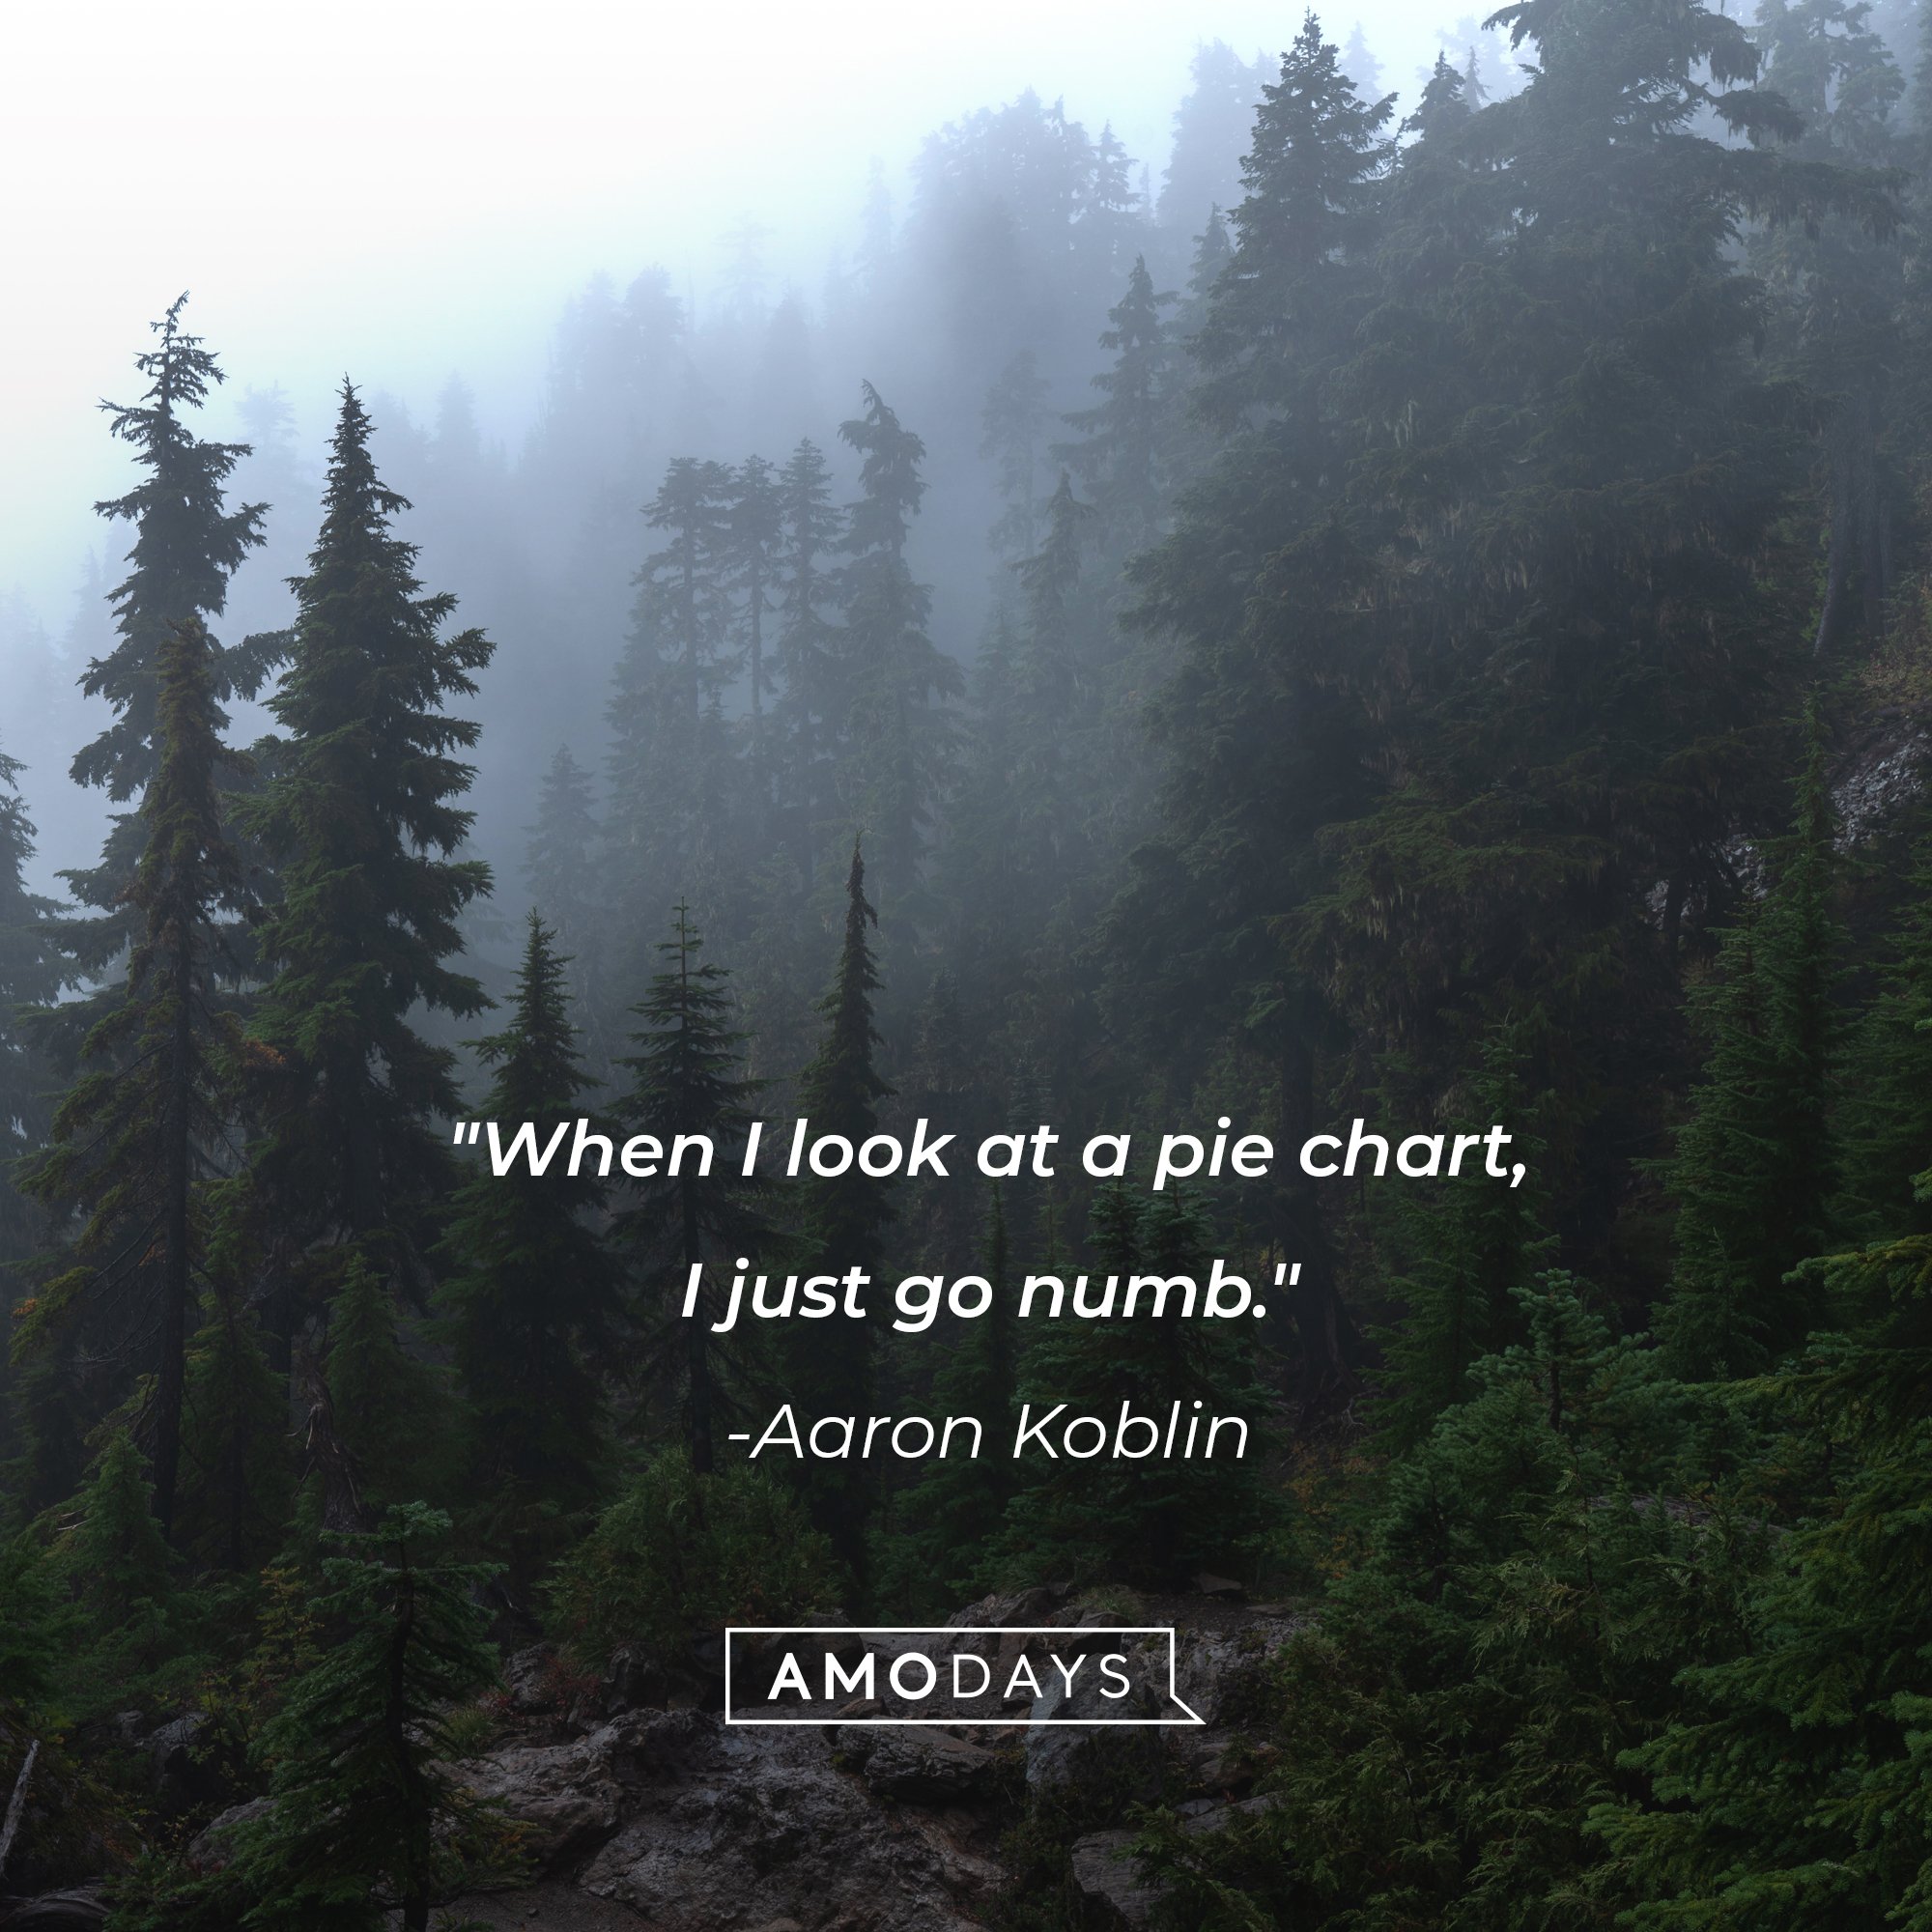  Aaron Koblin’s quote: "When I look at a pie chart, I just go numb." | Image: AmoDays 